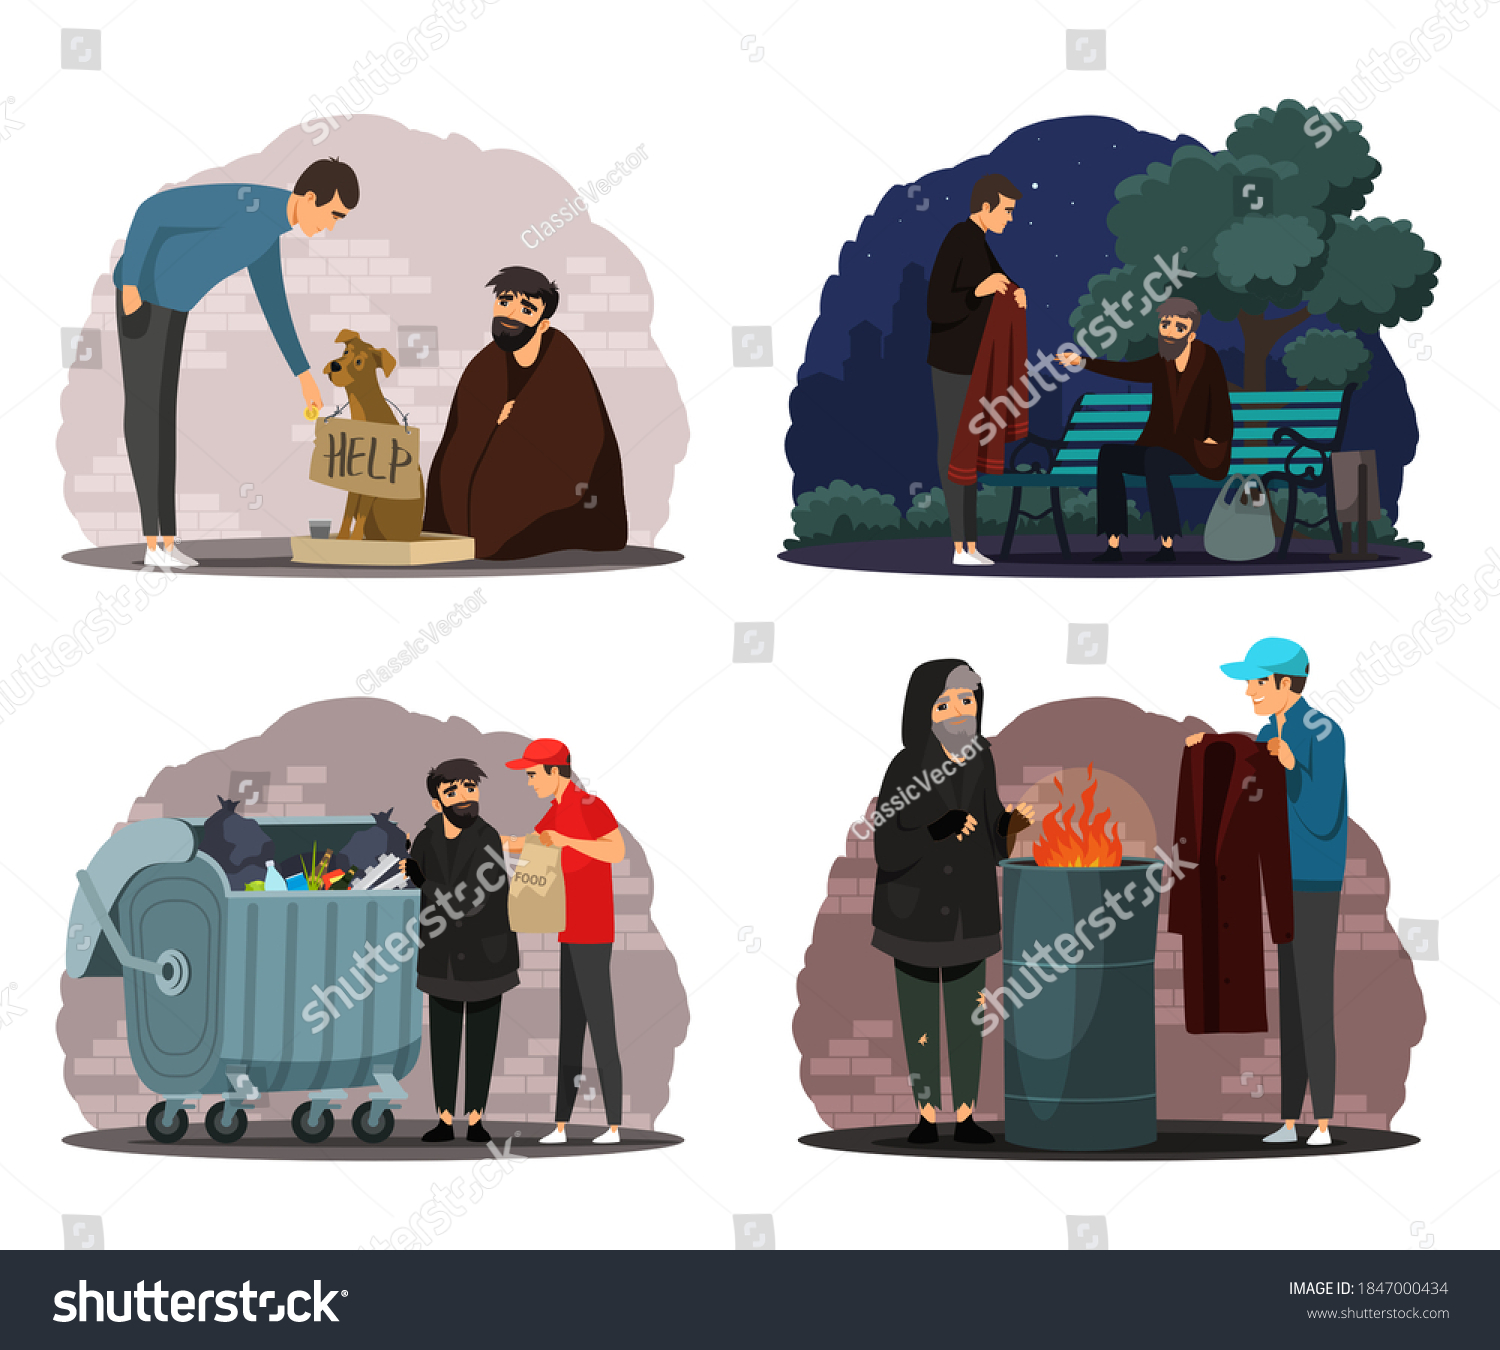 SVG of Man helping poor homeless people set. Poverty and charity vector illustration. Guy giving food, clothes, money to beggars in poverty. Social inequality in society. Volunteer workers. svg